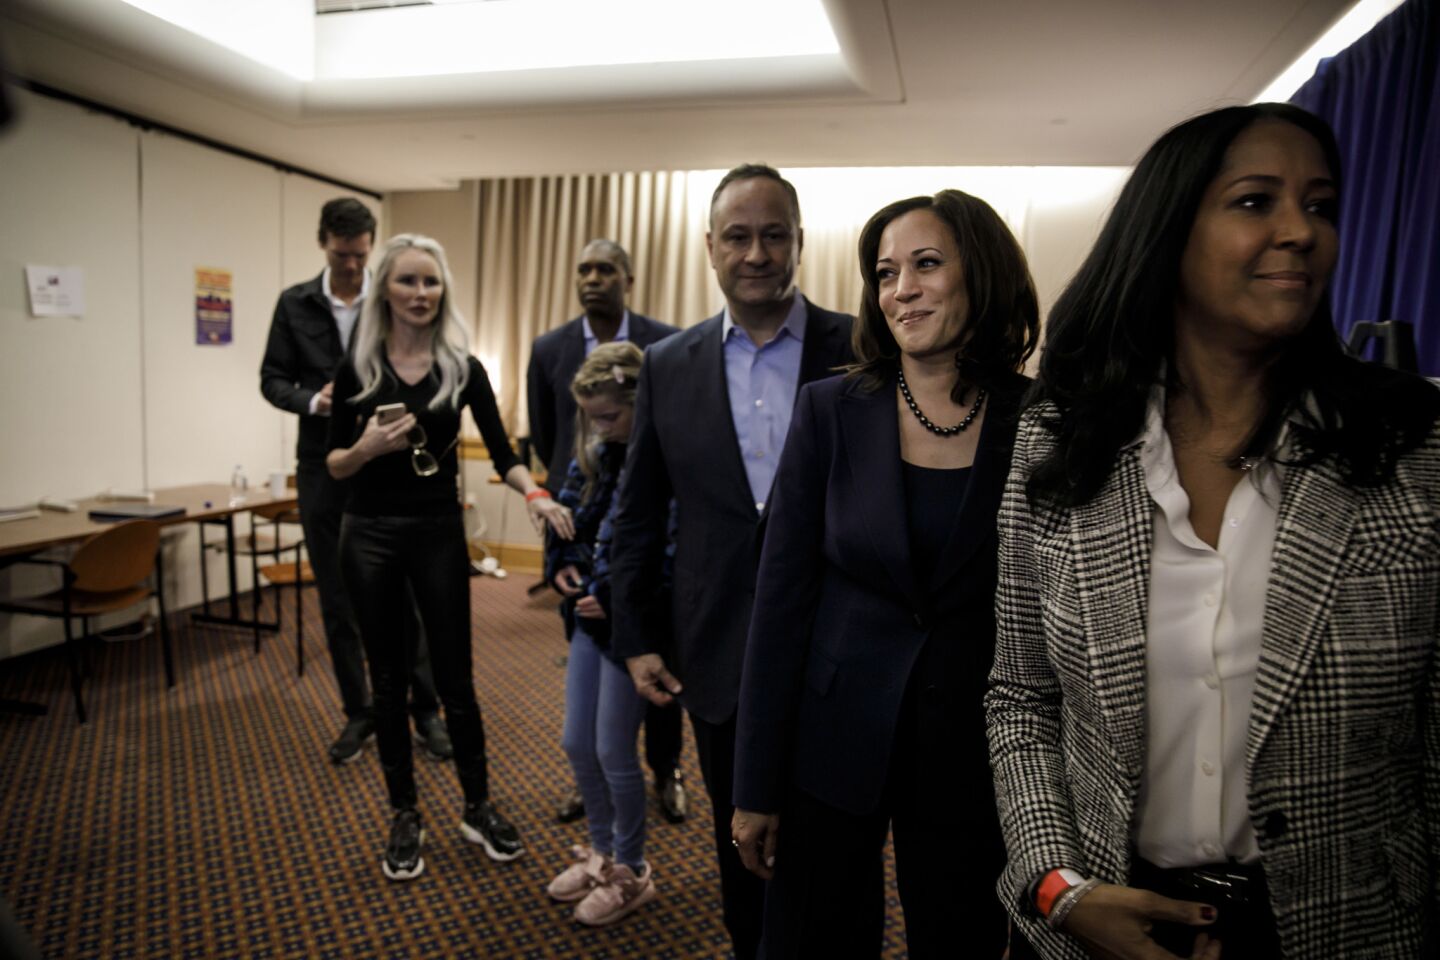 Sen. Kamala Harris waits backstage before making her appearance at a rally in Oakland.